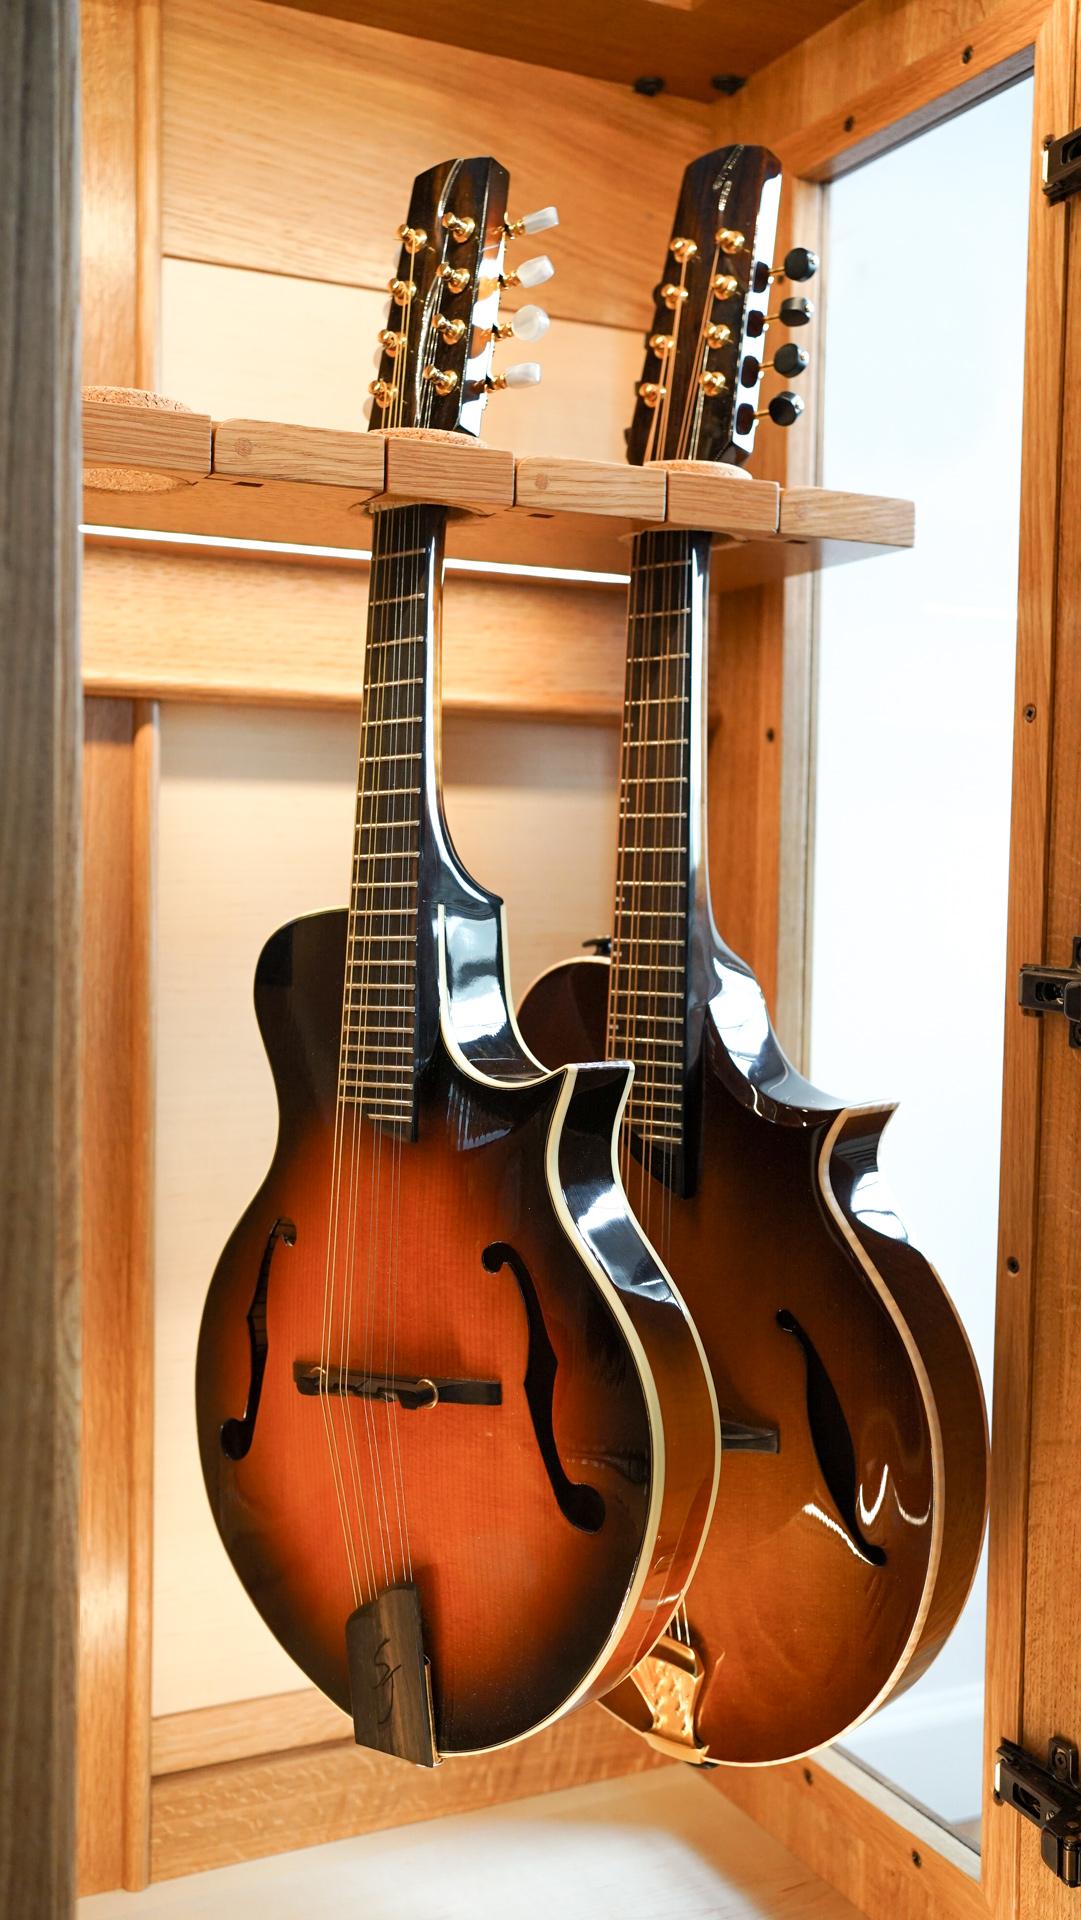 The String Habitat is a humidity-controlled display cabinet designed to house smaller stringed instruments like fiddles, violins, mandolins, mandolas, and ukuleles. Instruments suspend safely in our “Gallows” neck rest, a hand-carved, unique solid